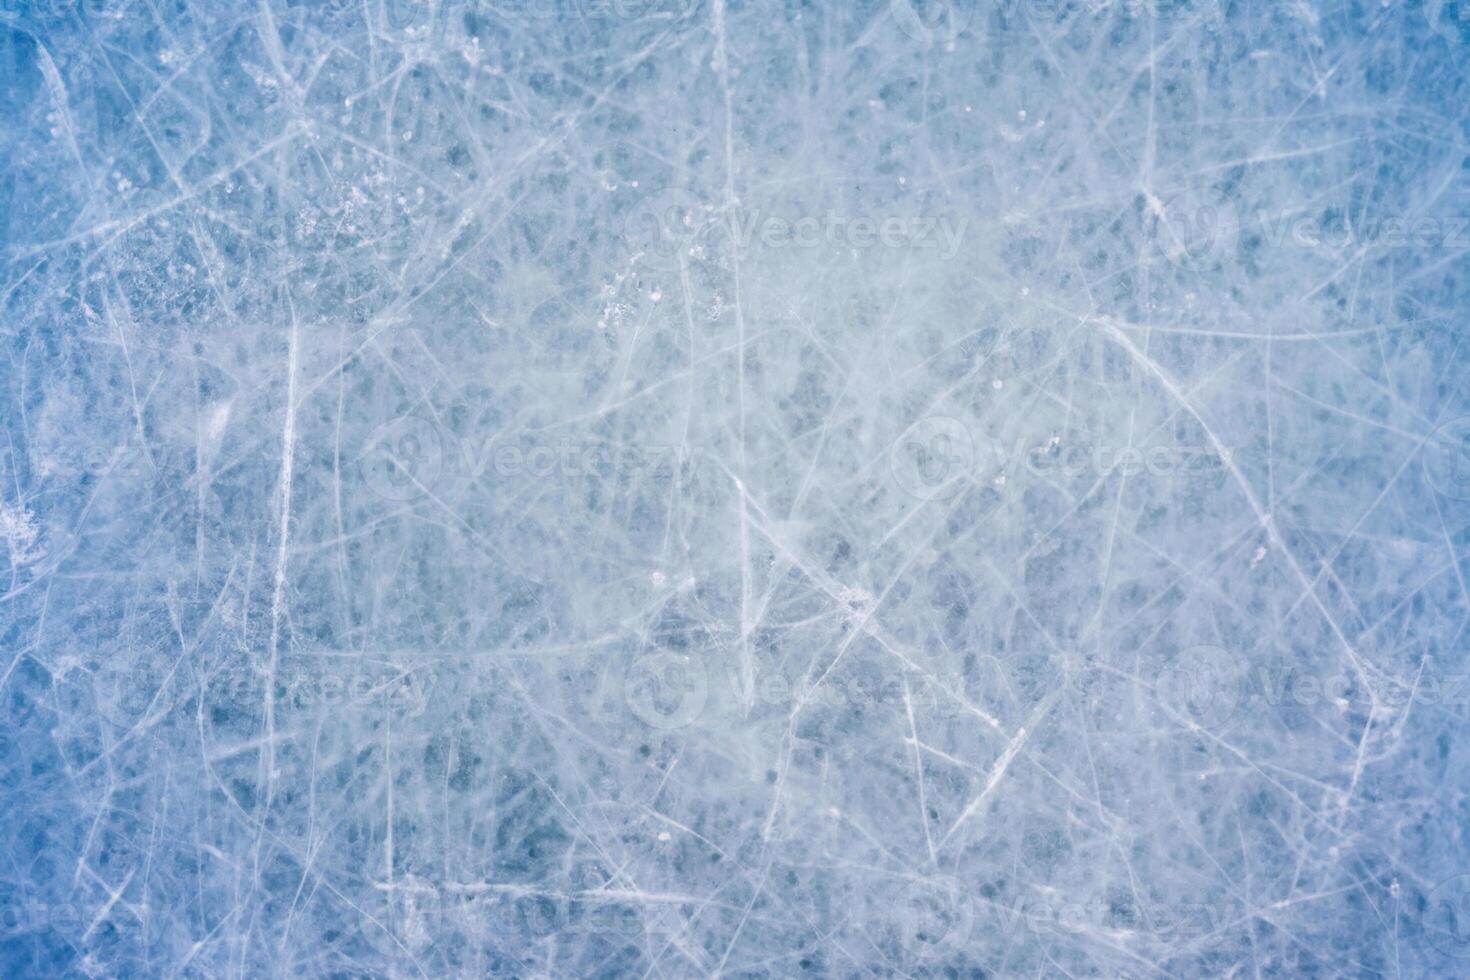 Icy Canvas, Abstract Patterns of Skating and Hockey Marks on Blue Rink Surface Texture. photo